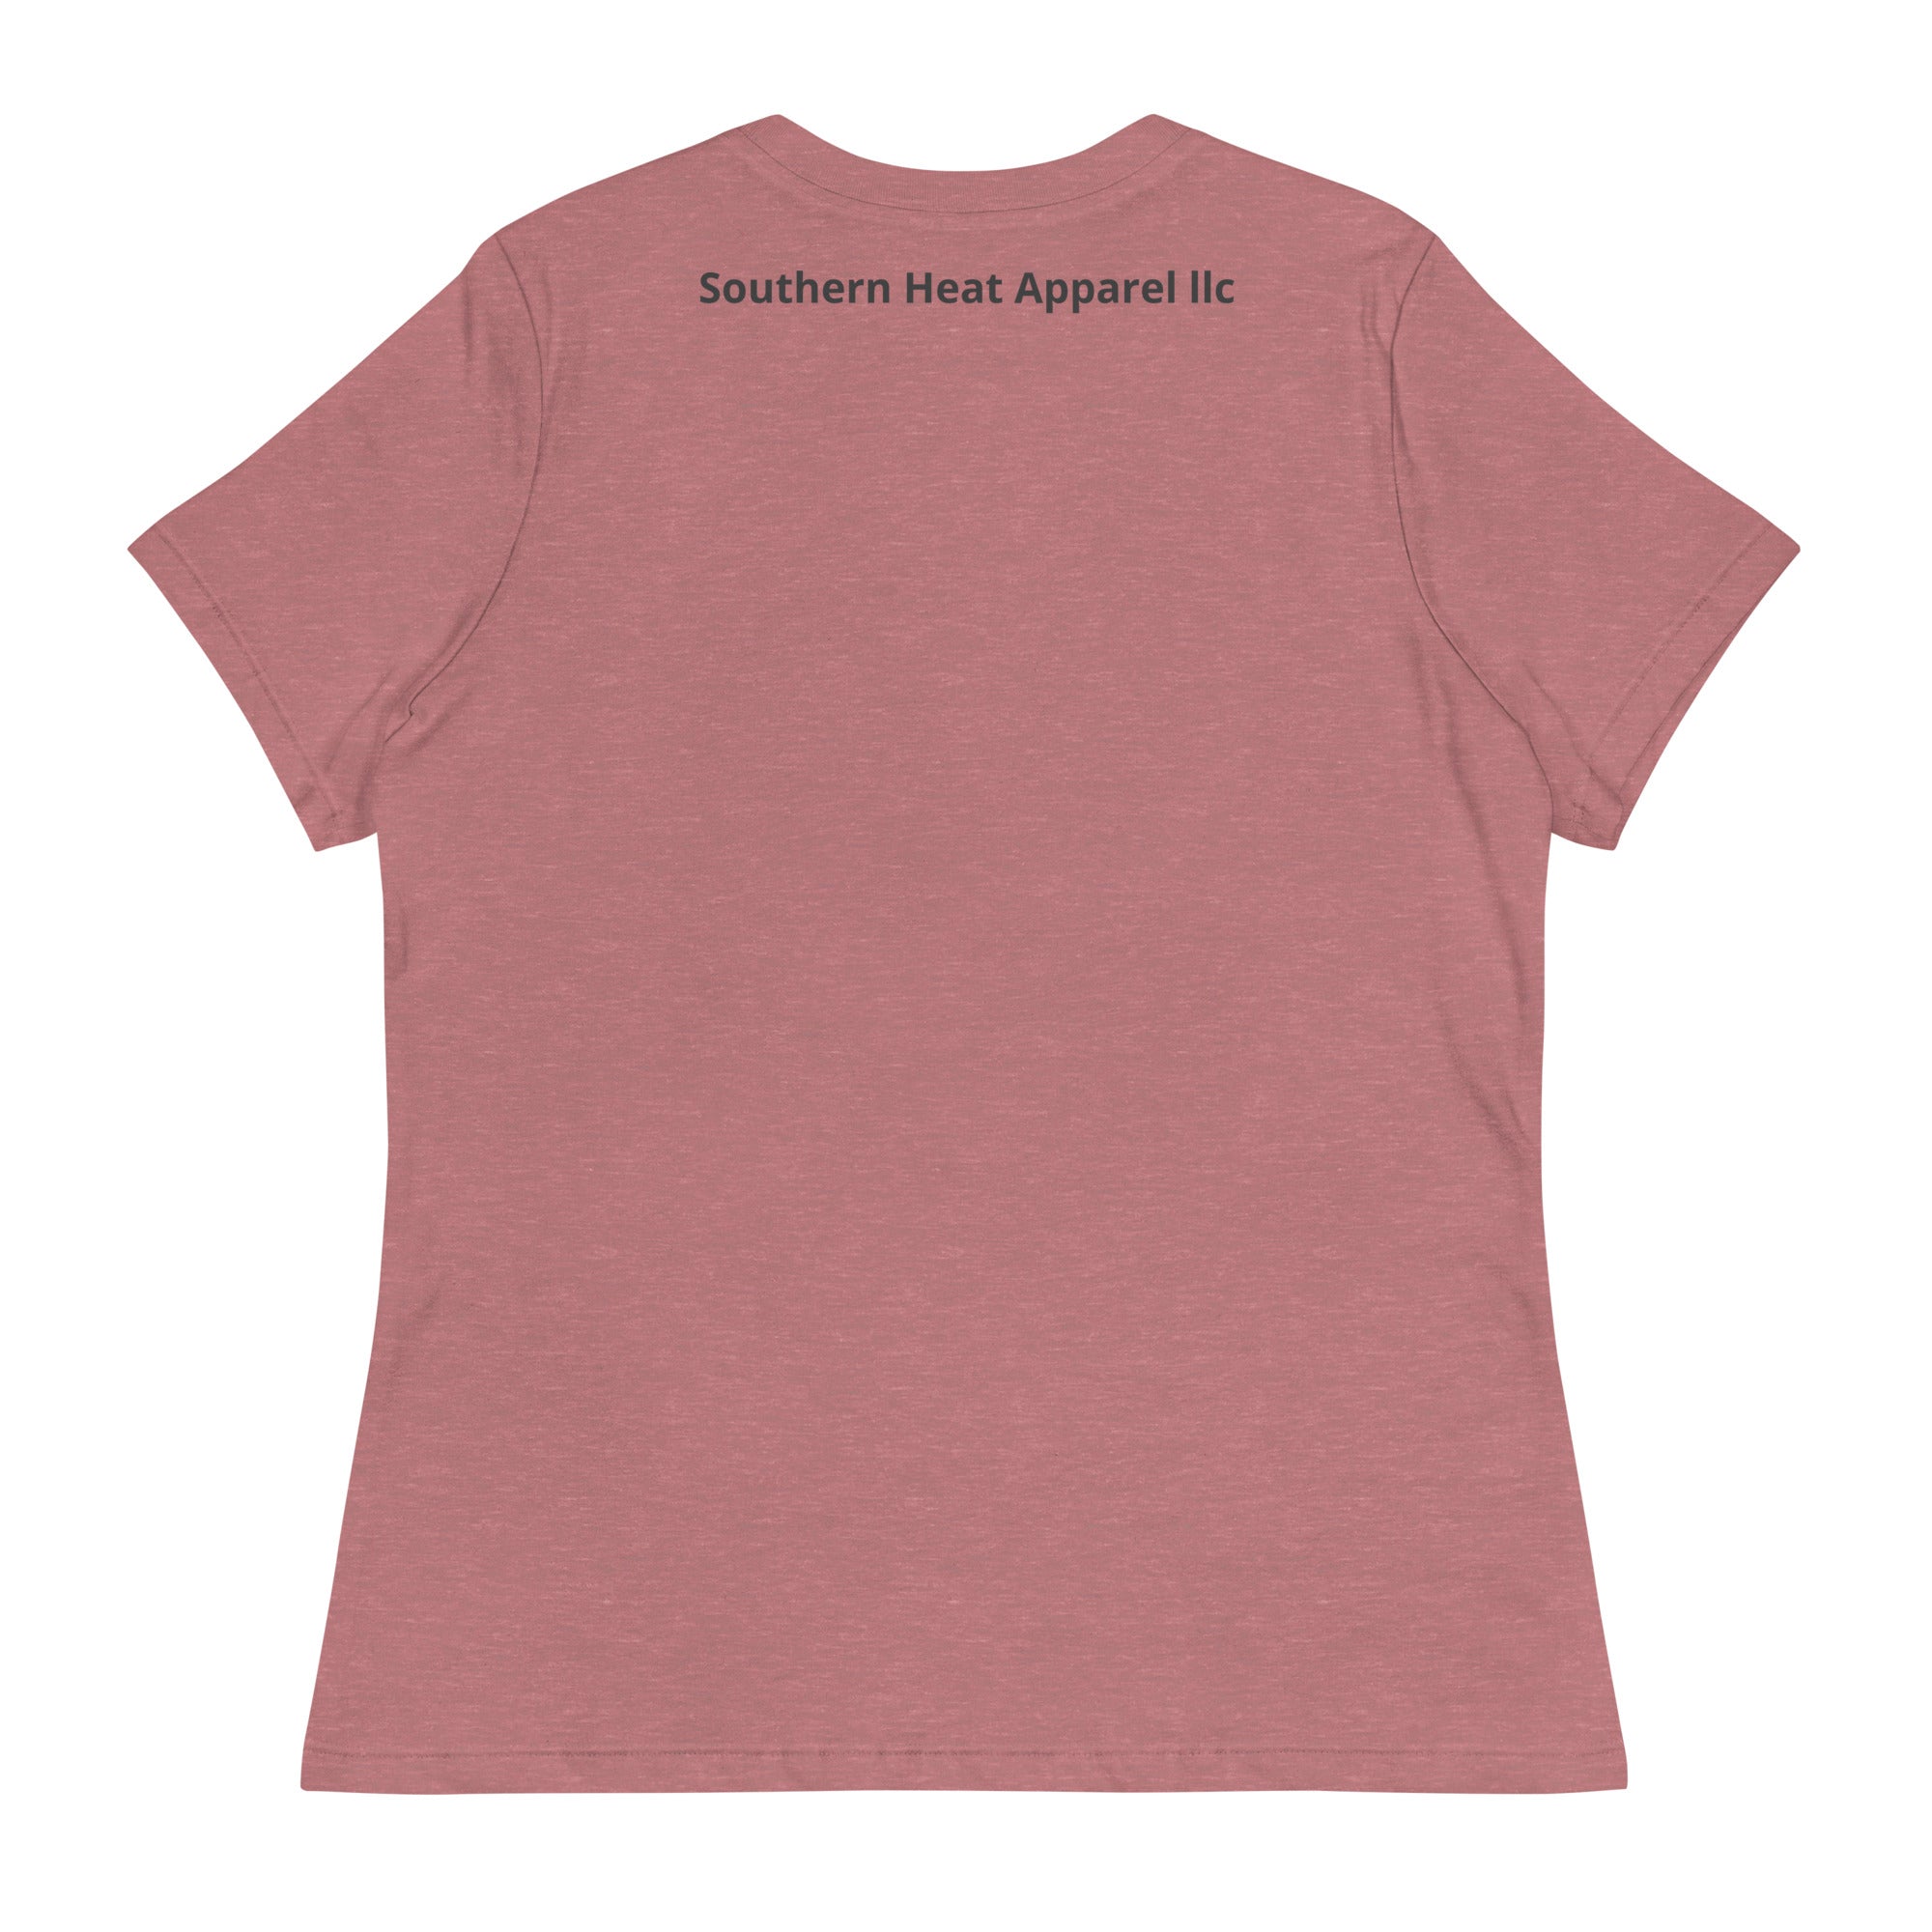 Kindness is the key-Women's Relaxed T-Shirt